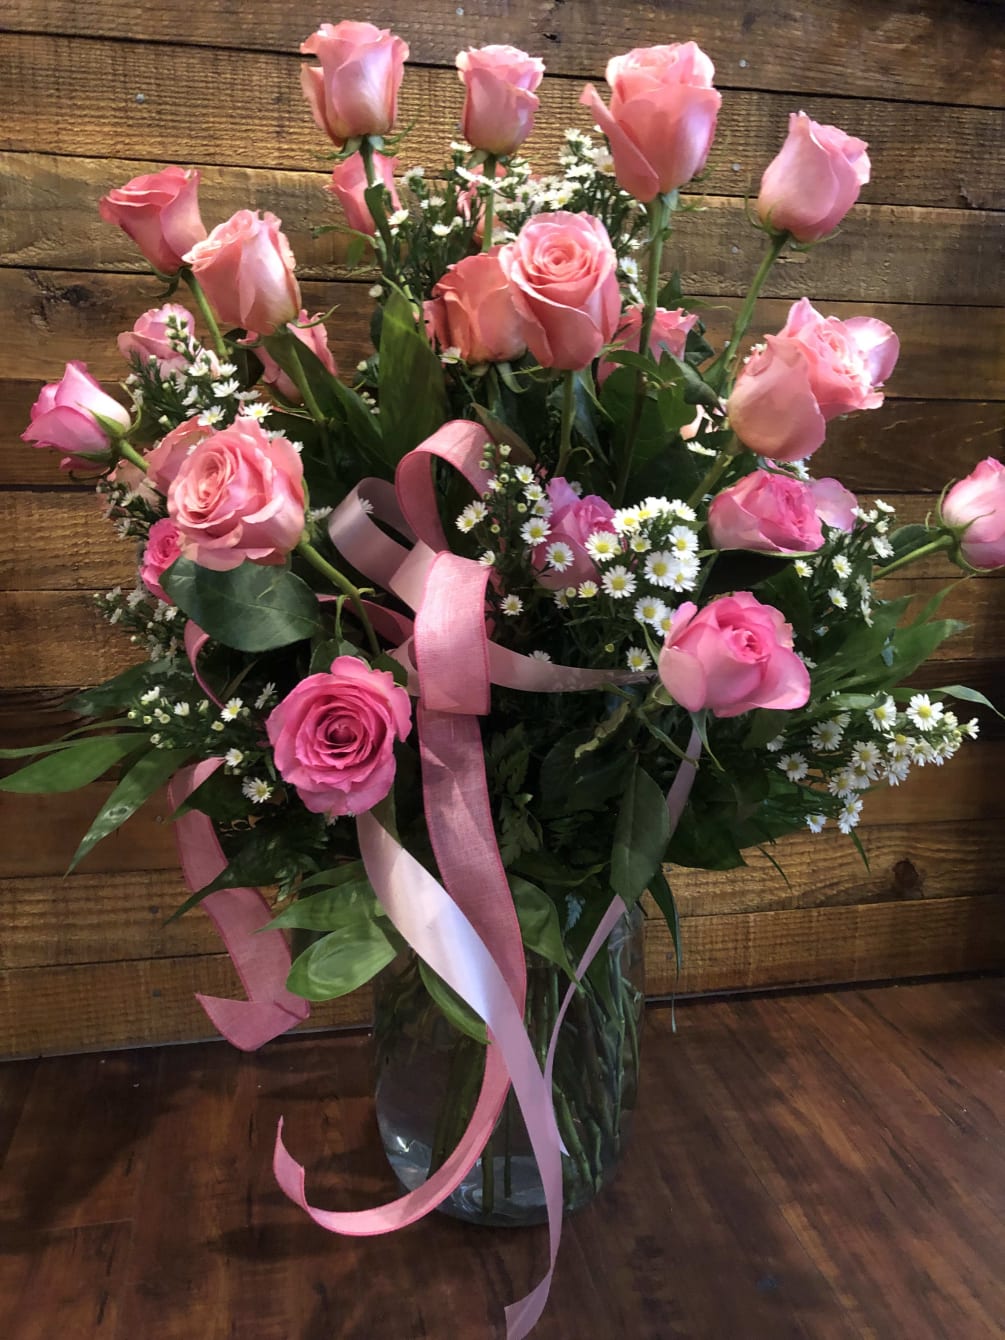 Two Dozen Rose Bouquet Can be Ordered in Other Colors Then Pink
We